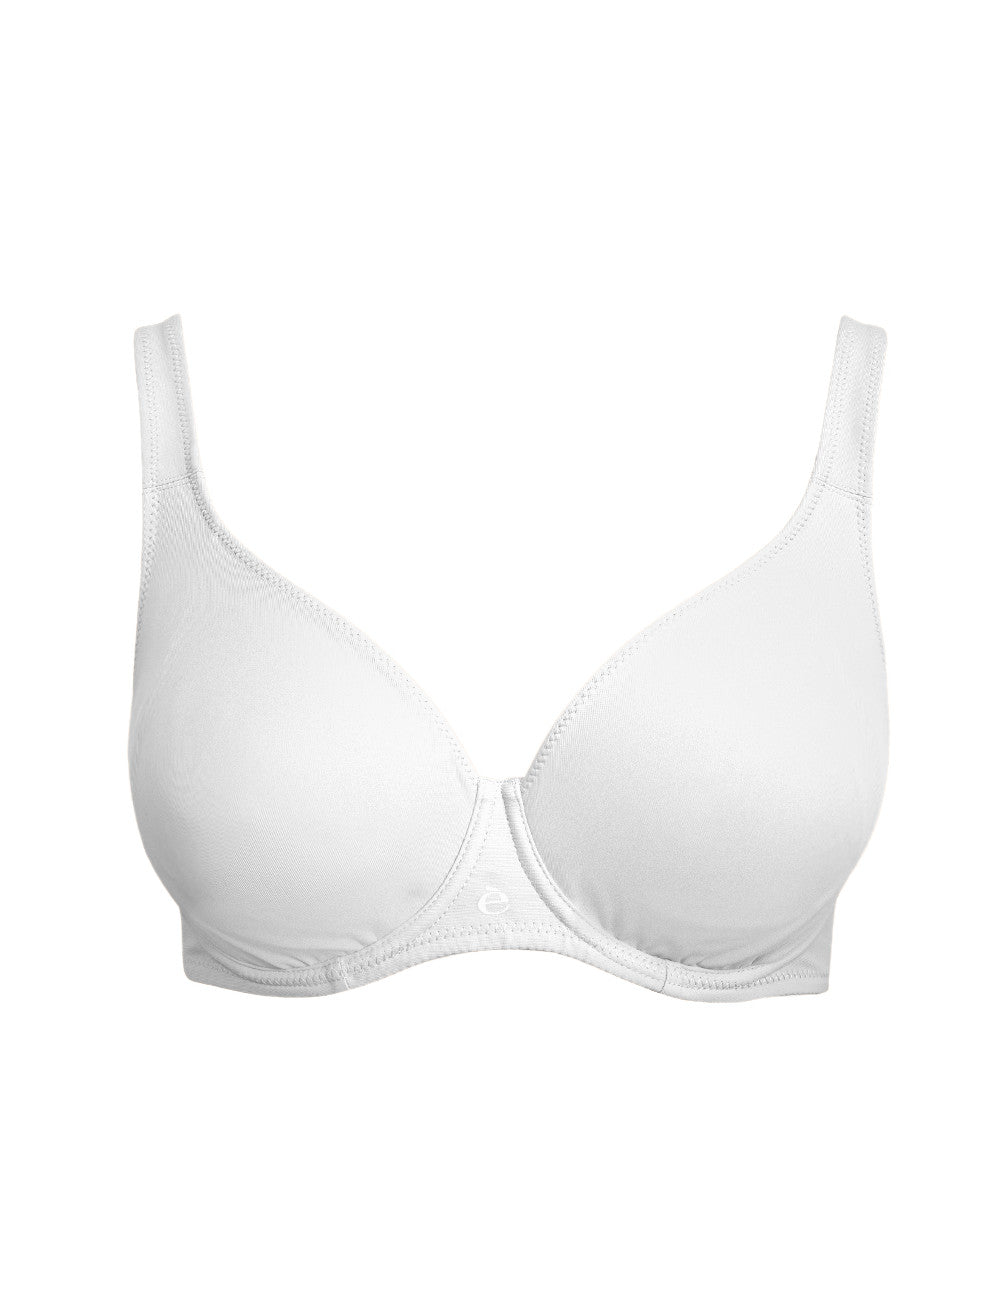 Collection Je t'aime - Soft padded cup bra and Culotte - Leilieve - Women  Underwear Made in Italy since 1961